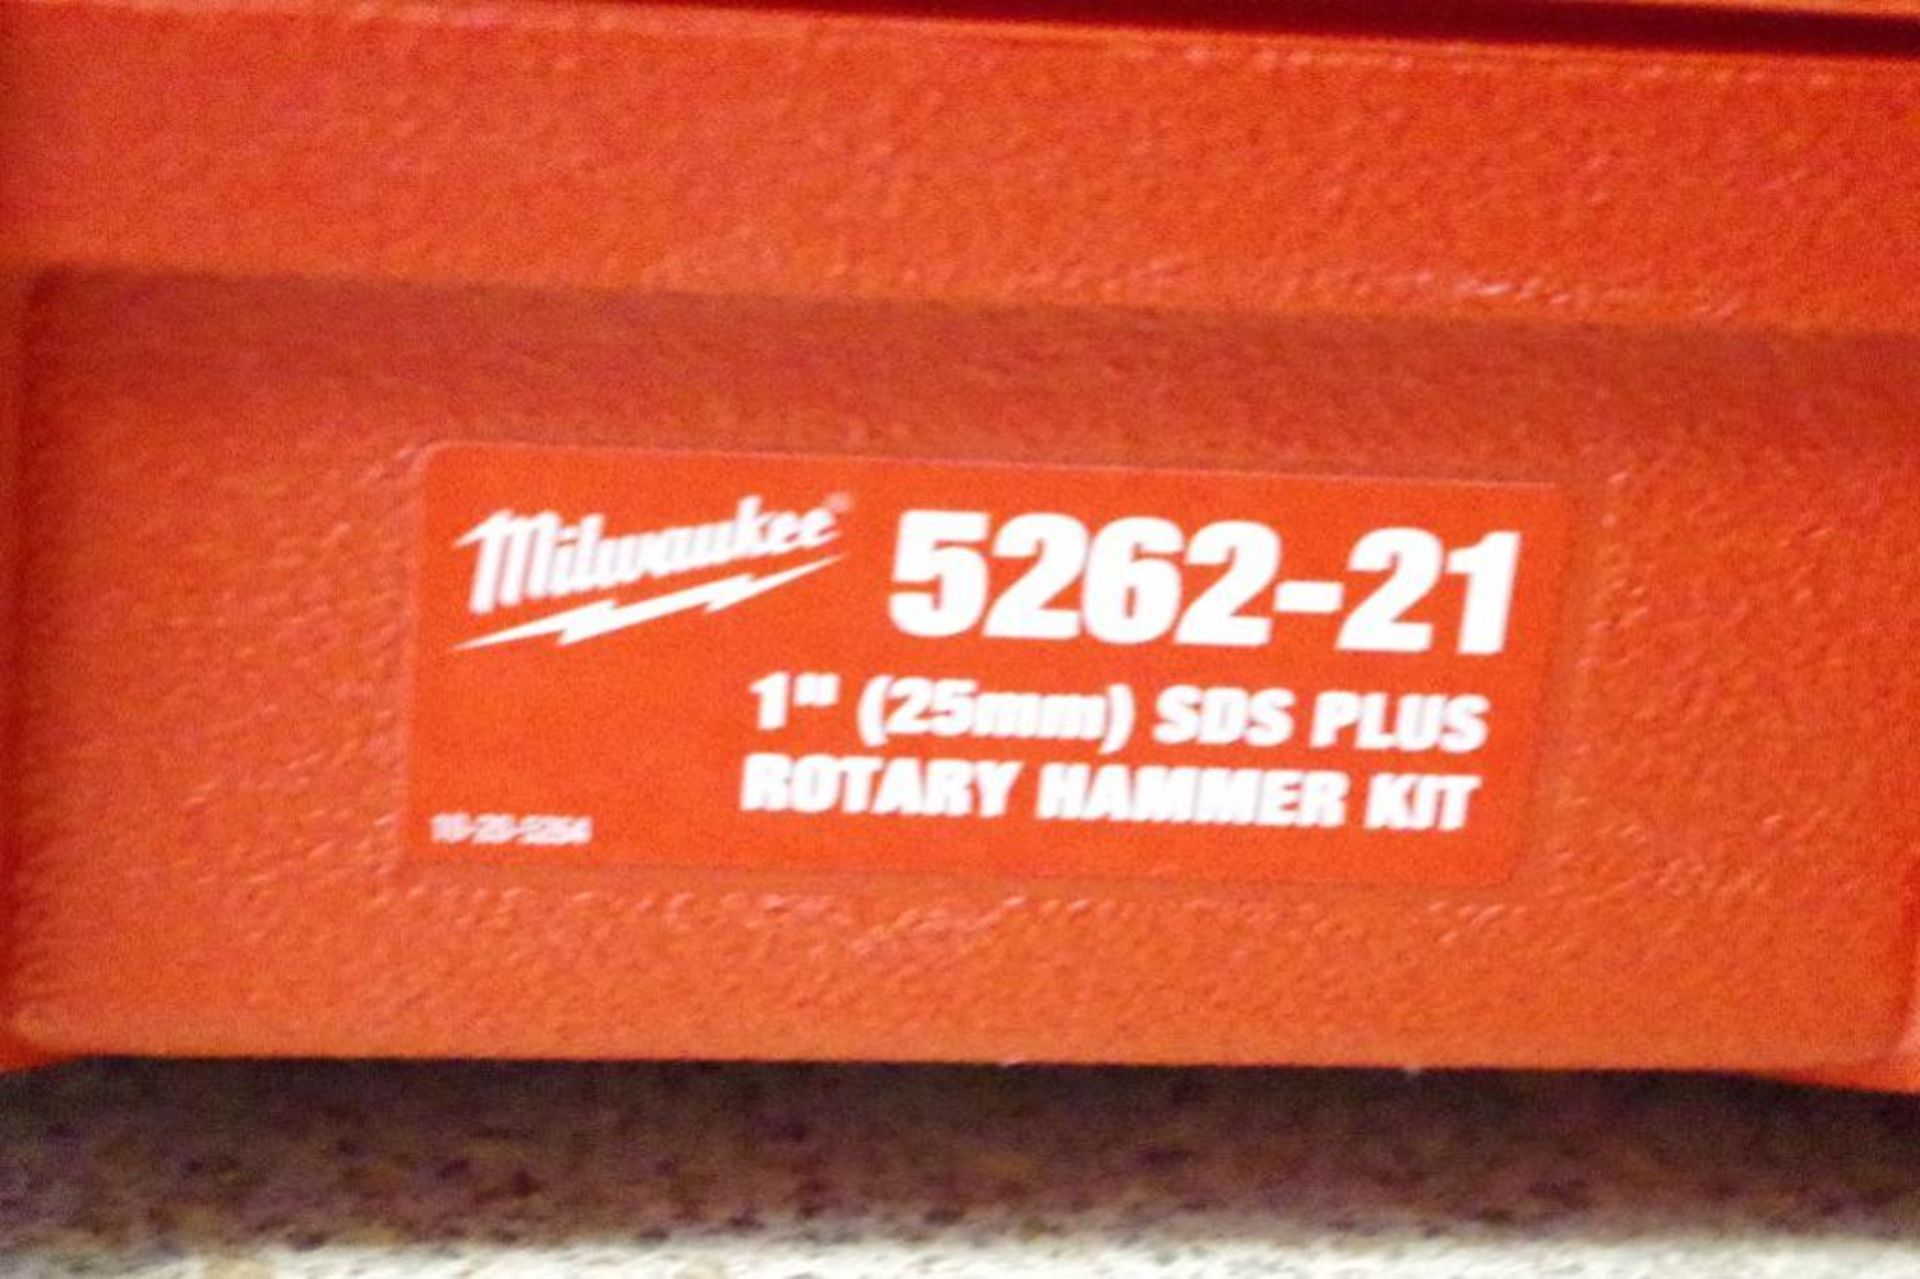 MILWAUKEE 1" SDS Plus Rotary Hammer M/N 5262-21 w/ Tool Grip & Case - Image 3 of 4